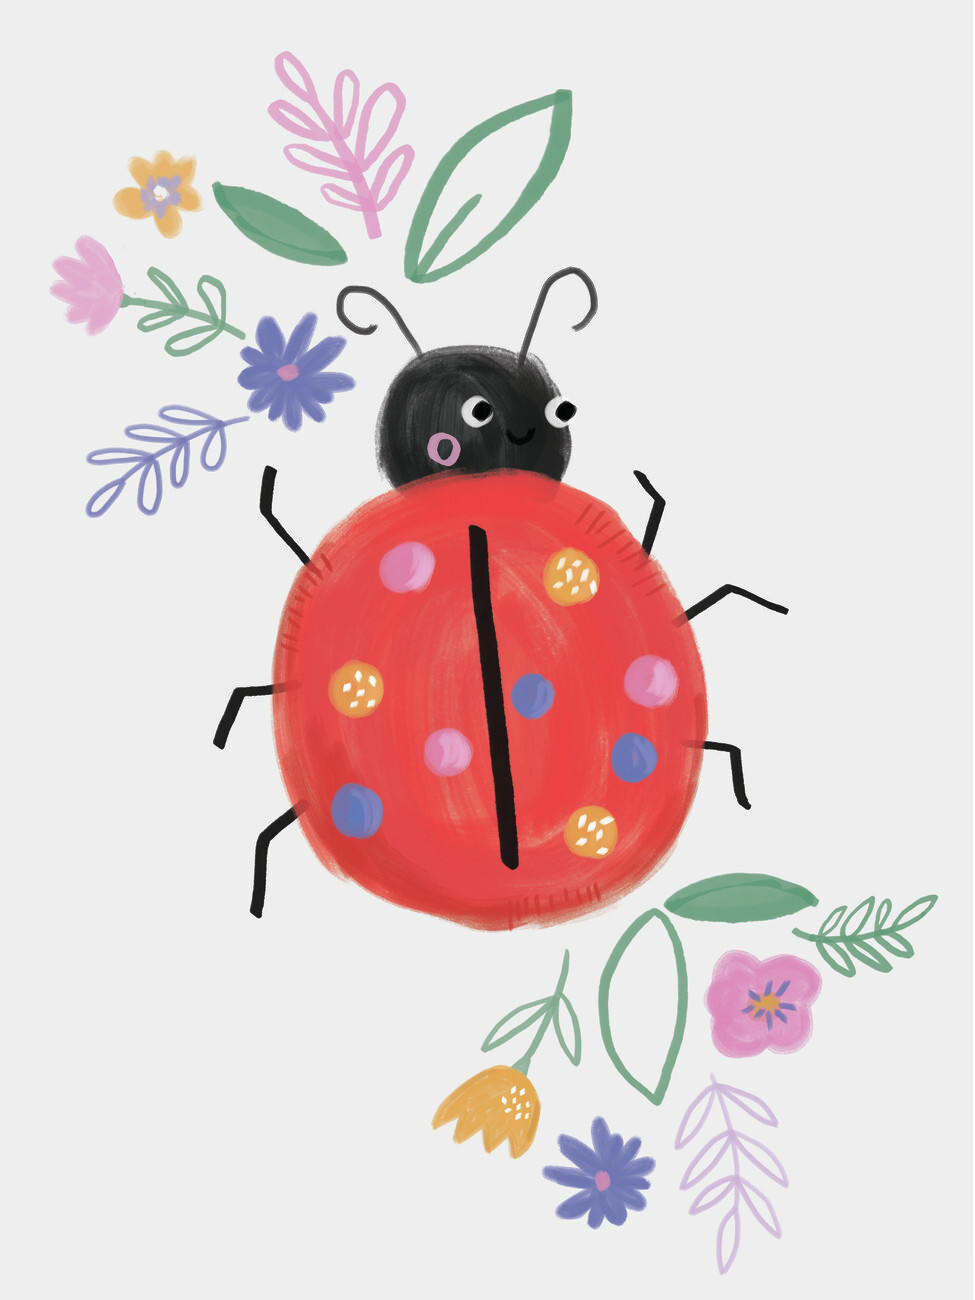 How To Draw A Ladybug - Made with HAPPY